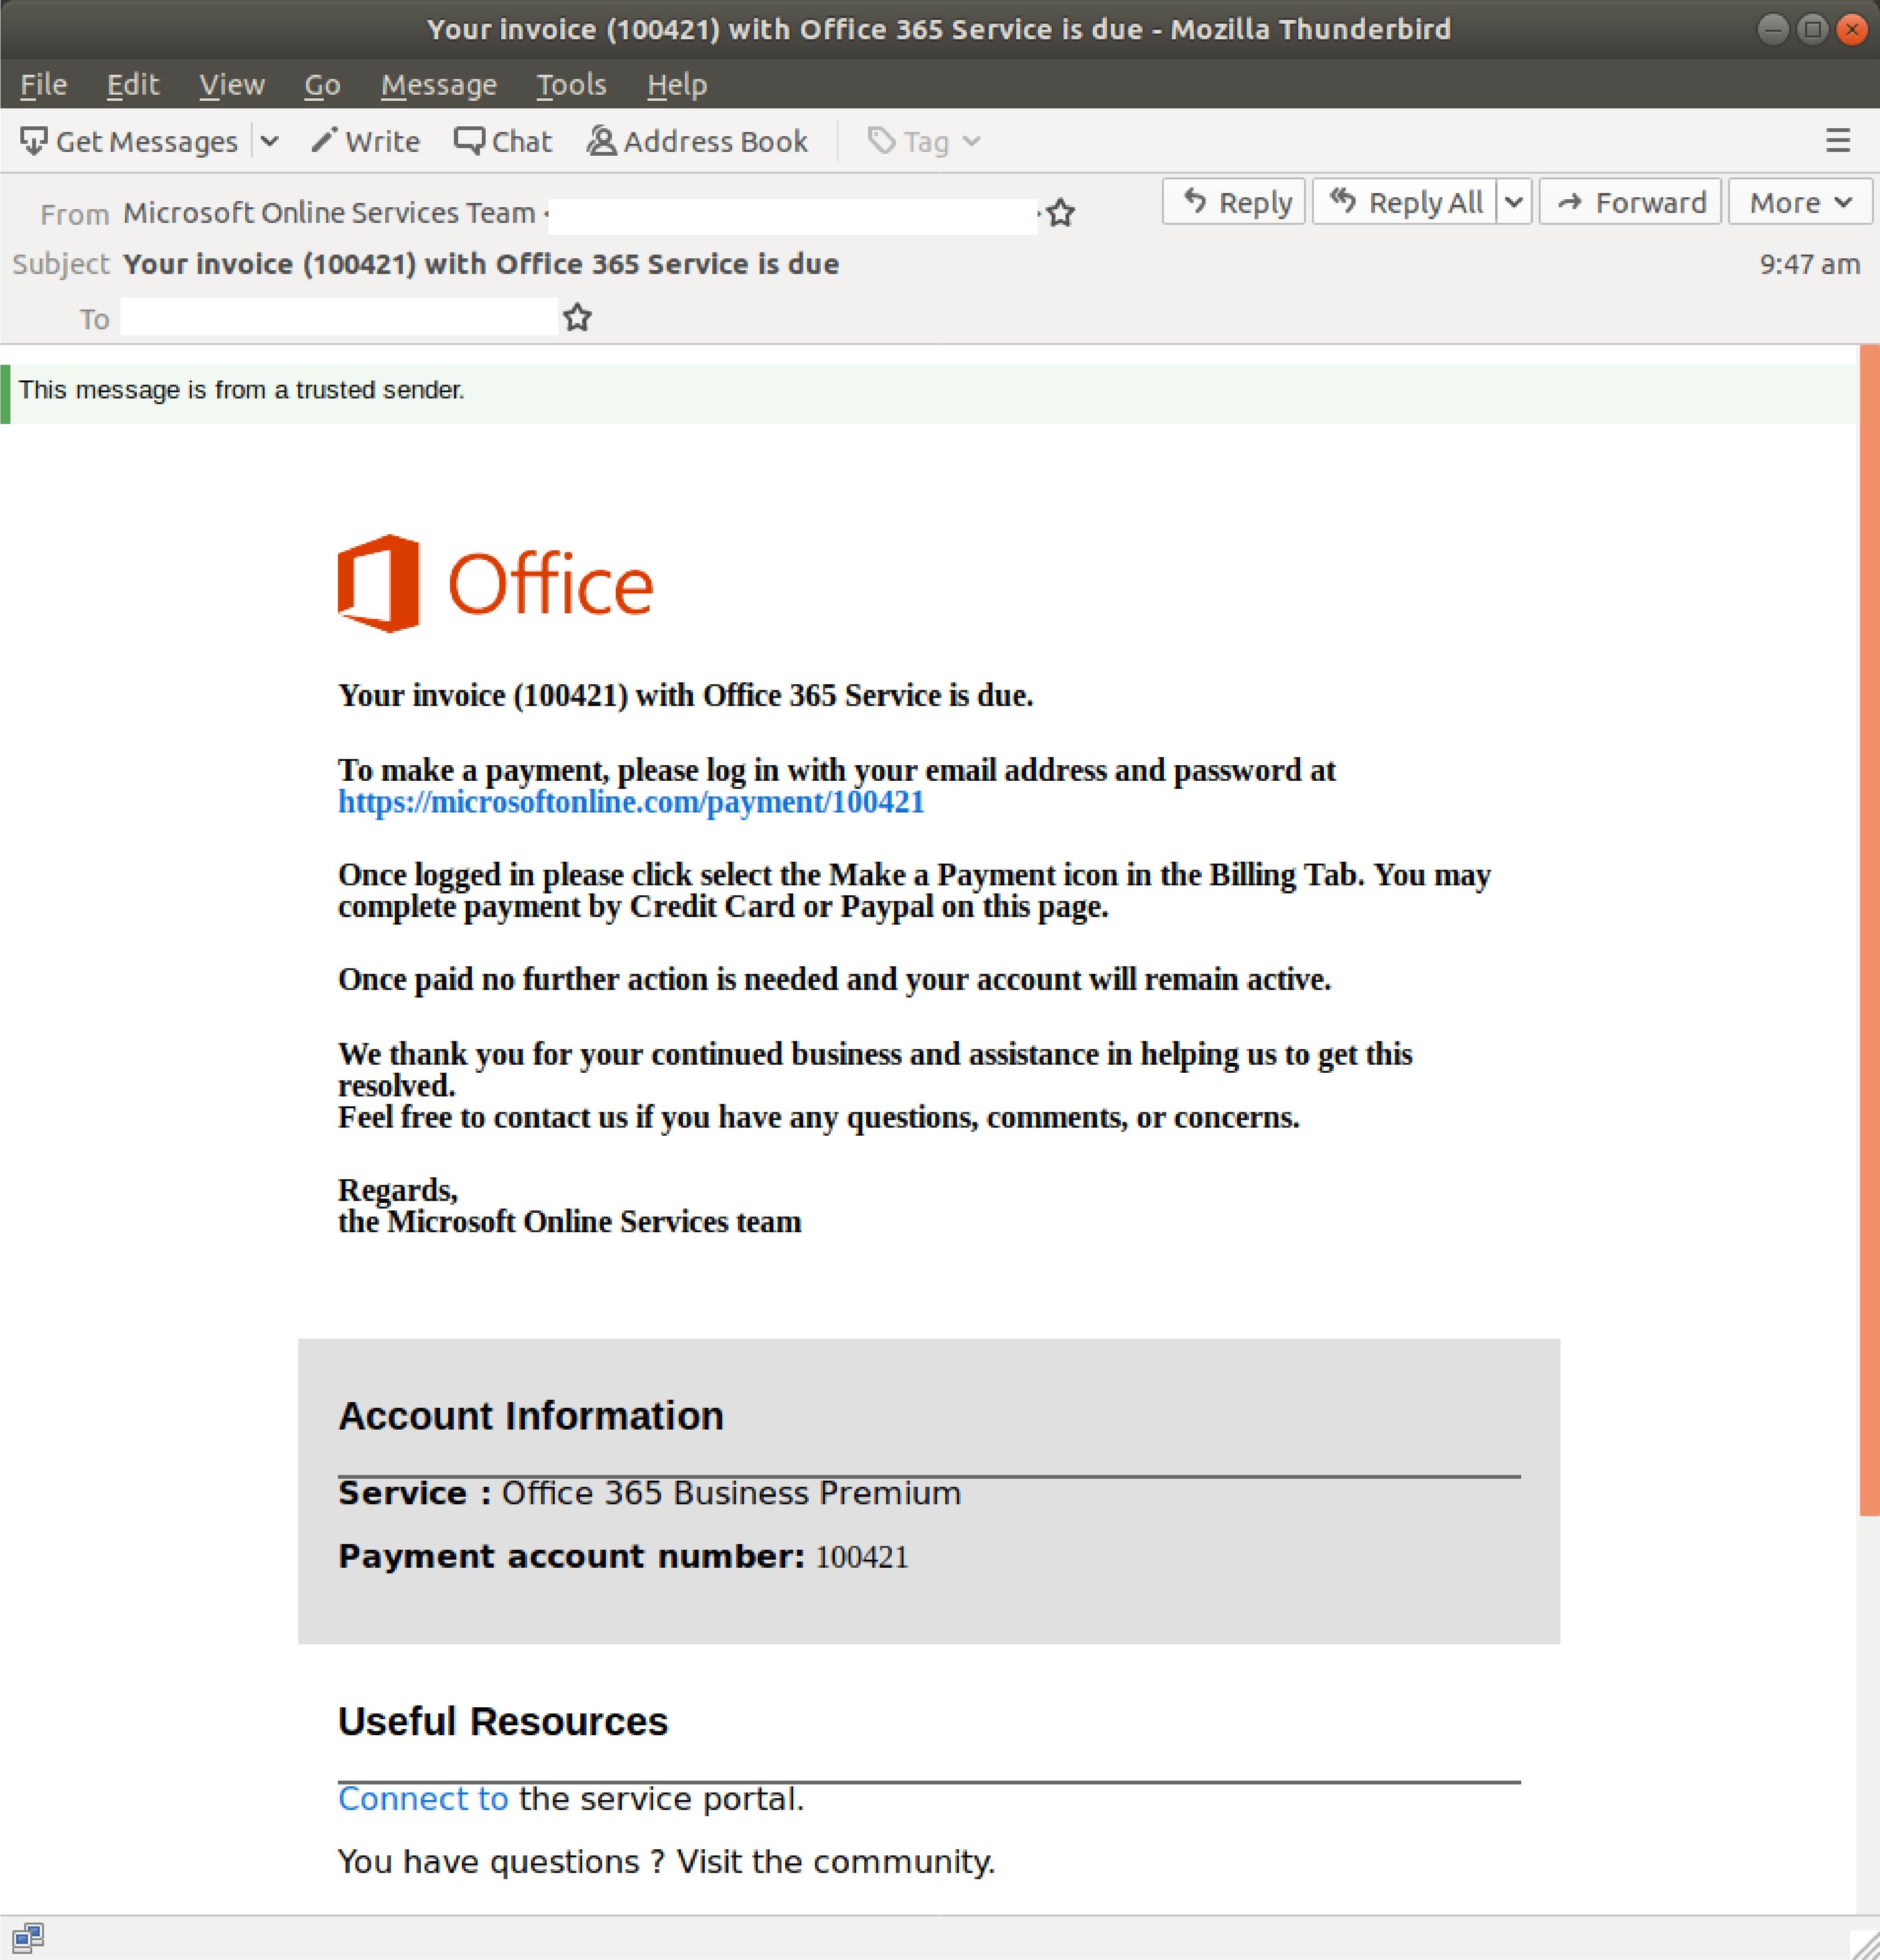 Think twice before paying this invoice supposedly from Office 365